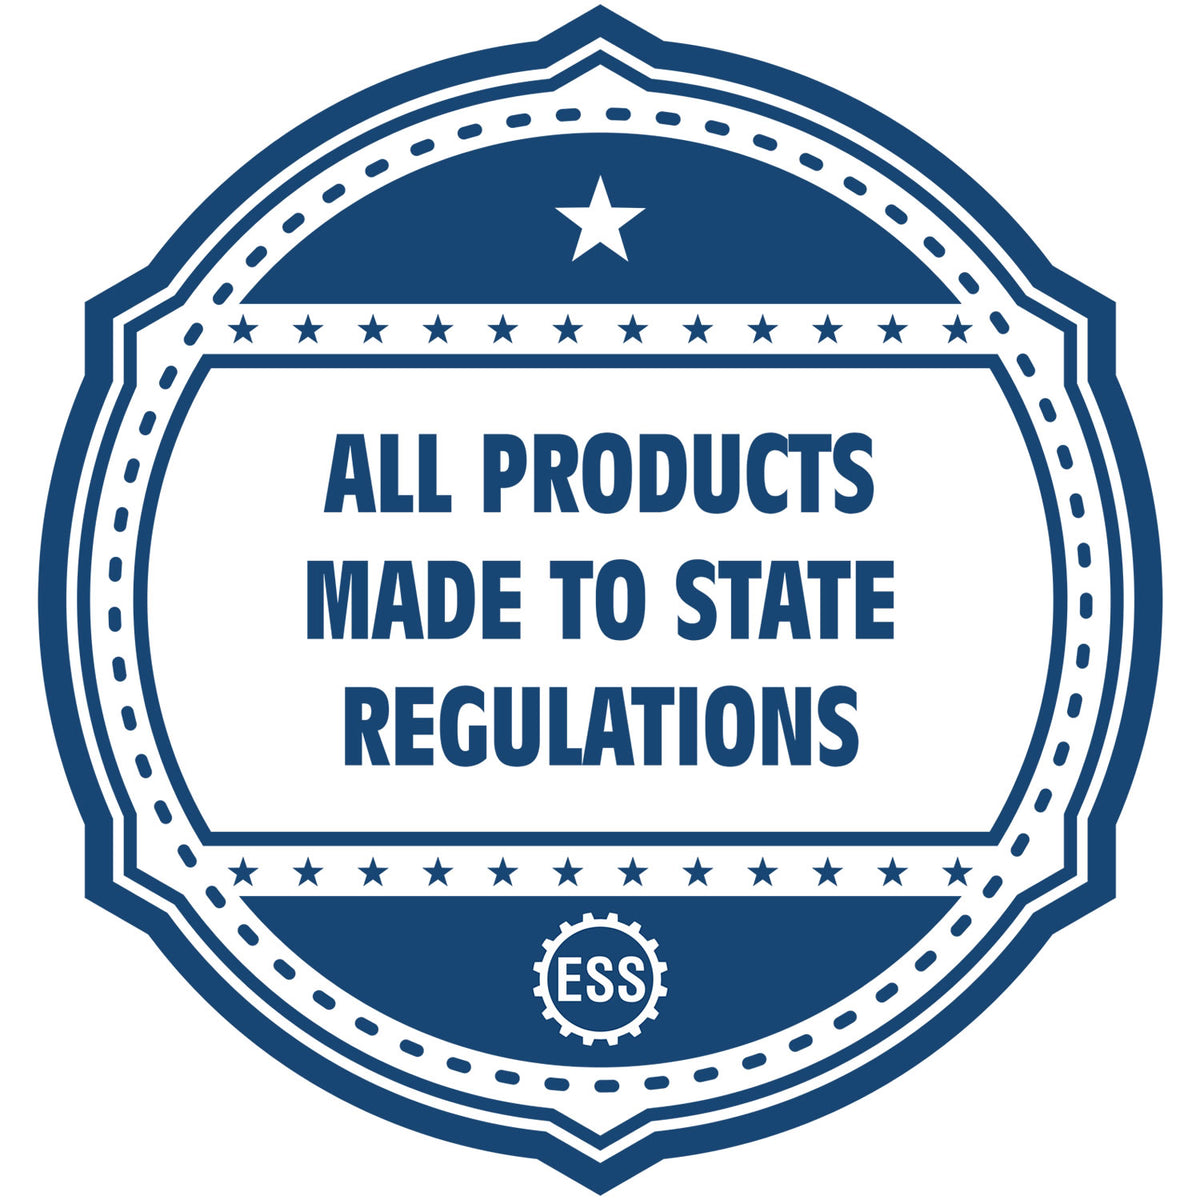 An icon or badge element for the Heavy-Duty Michigan Rectangular Notary Stamp showing that this product is made in compliance with state regulations.